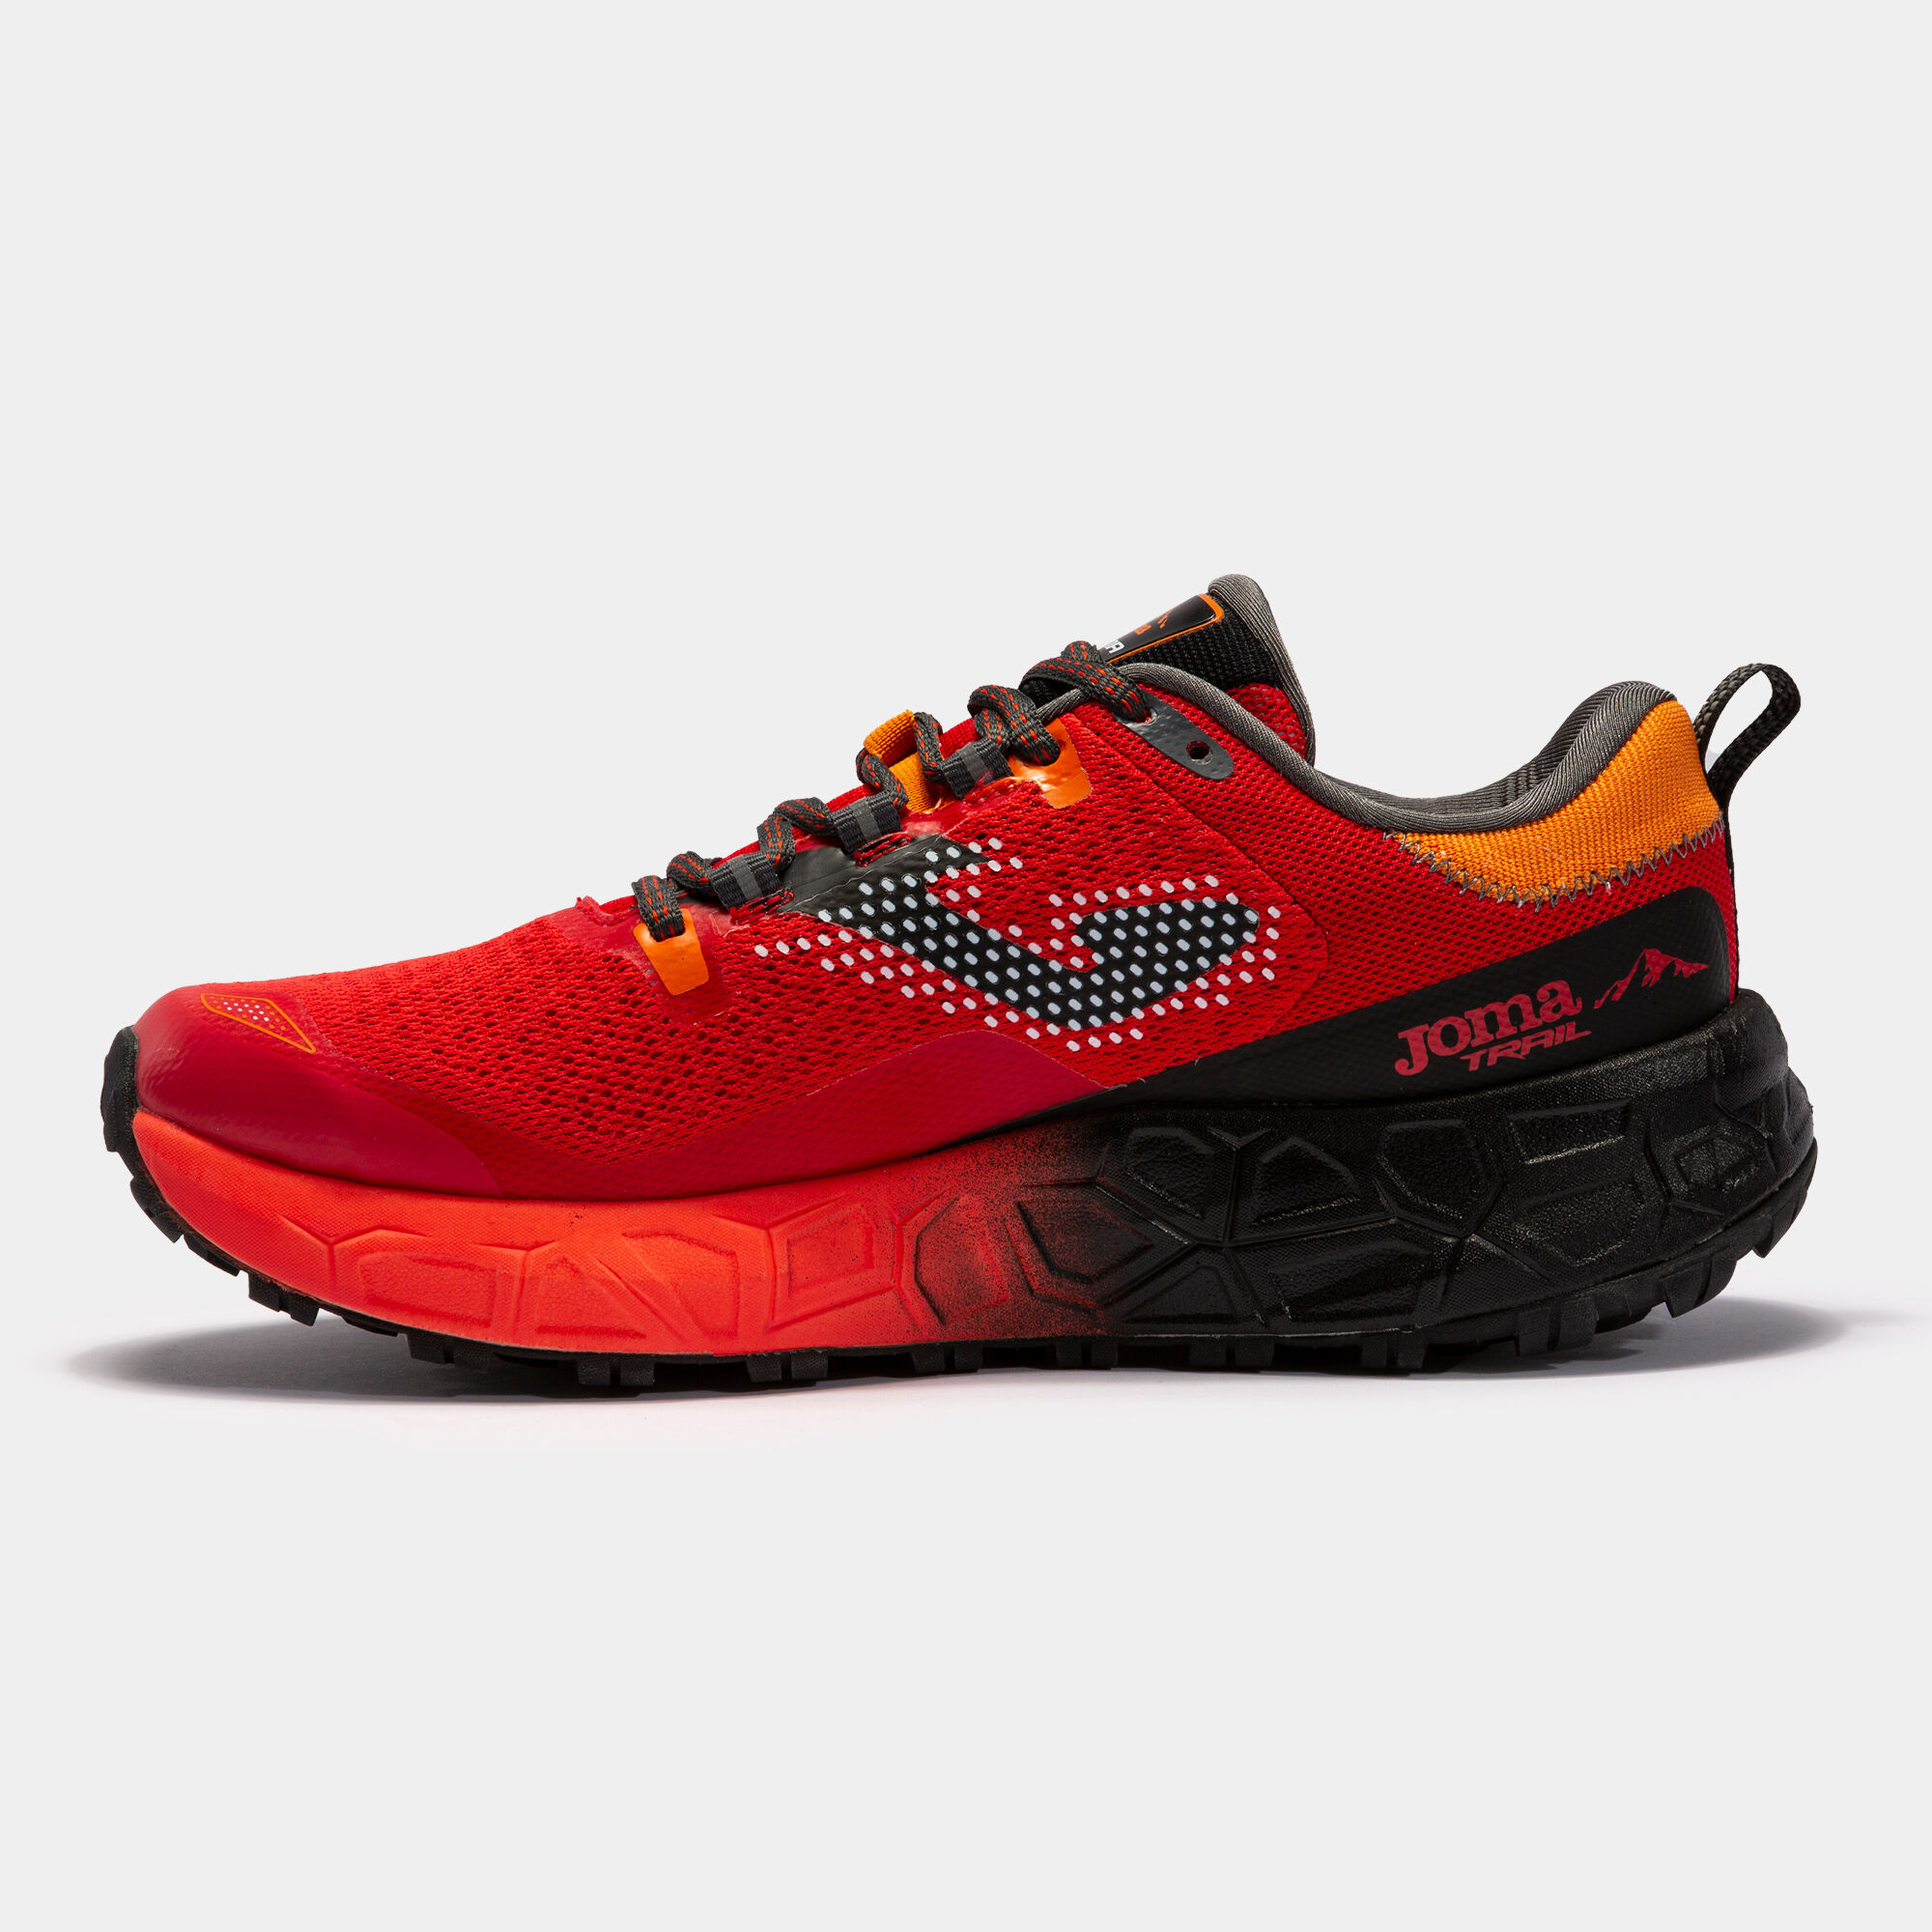 CHAUSSURES TRAIL RUNNING SIMA 22 HOMME ROUGE ORANGE